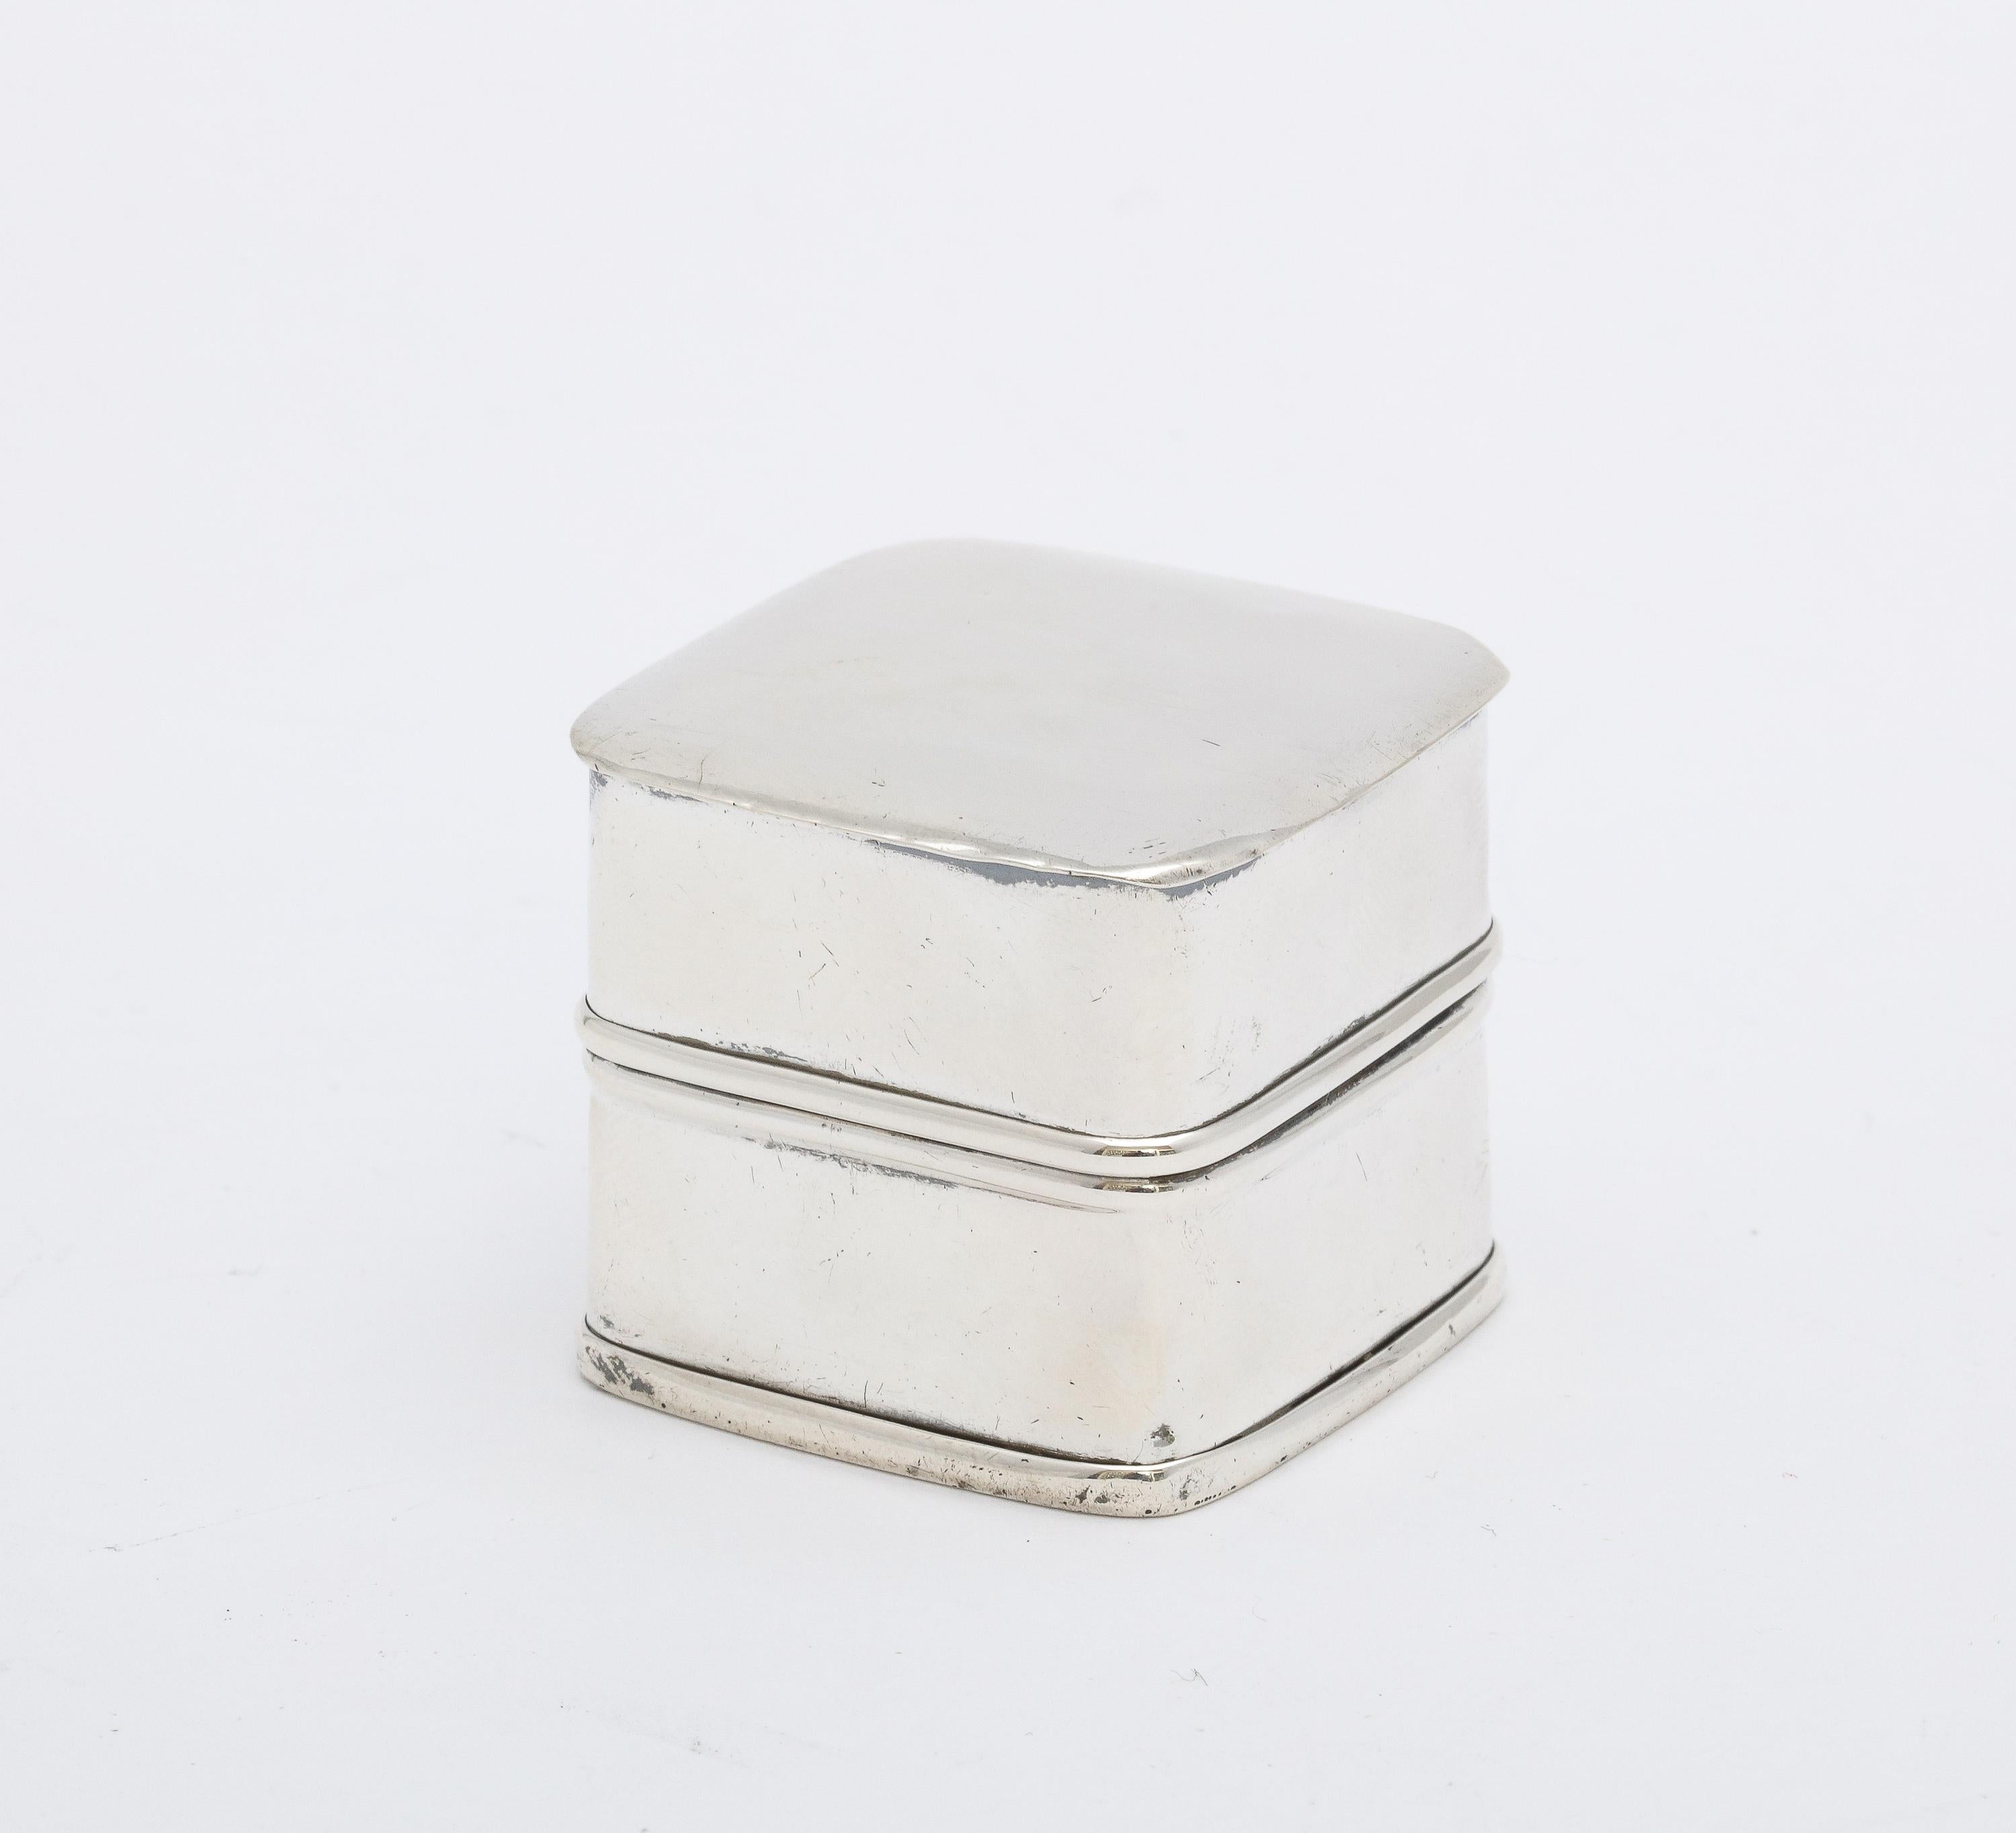 Edwardian Period, sterling silver ring box with hinged lid, J.E. Ellis and Company, Toronto, Canada. Ca. 1900. Tight closure. Lined with off-white fabric which has some minor staining (see photos) which is commensurate with age and use. There are